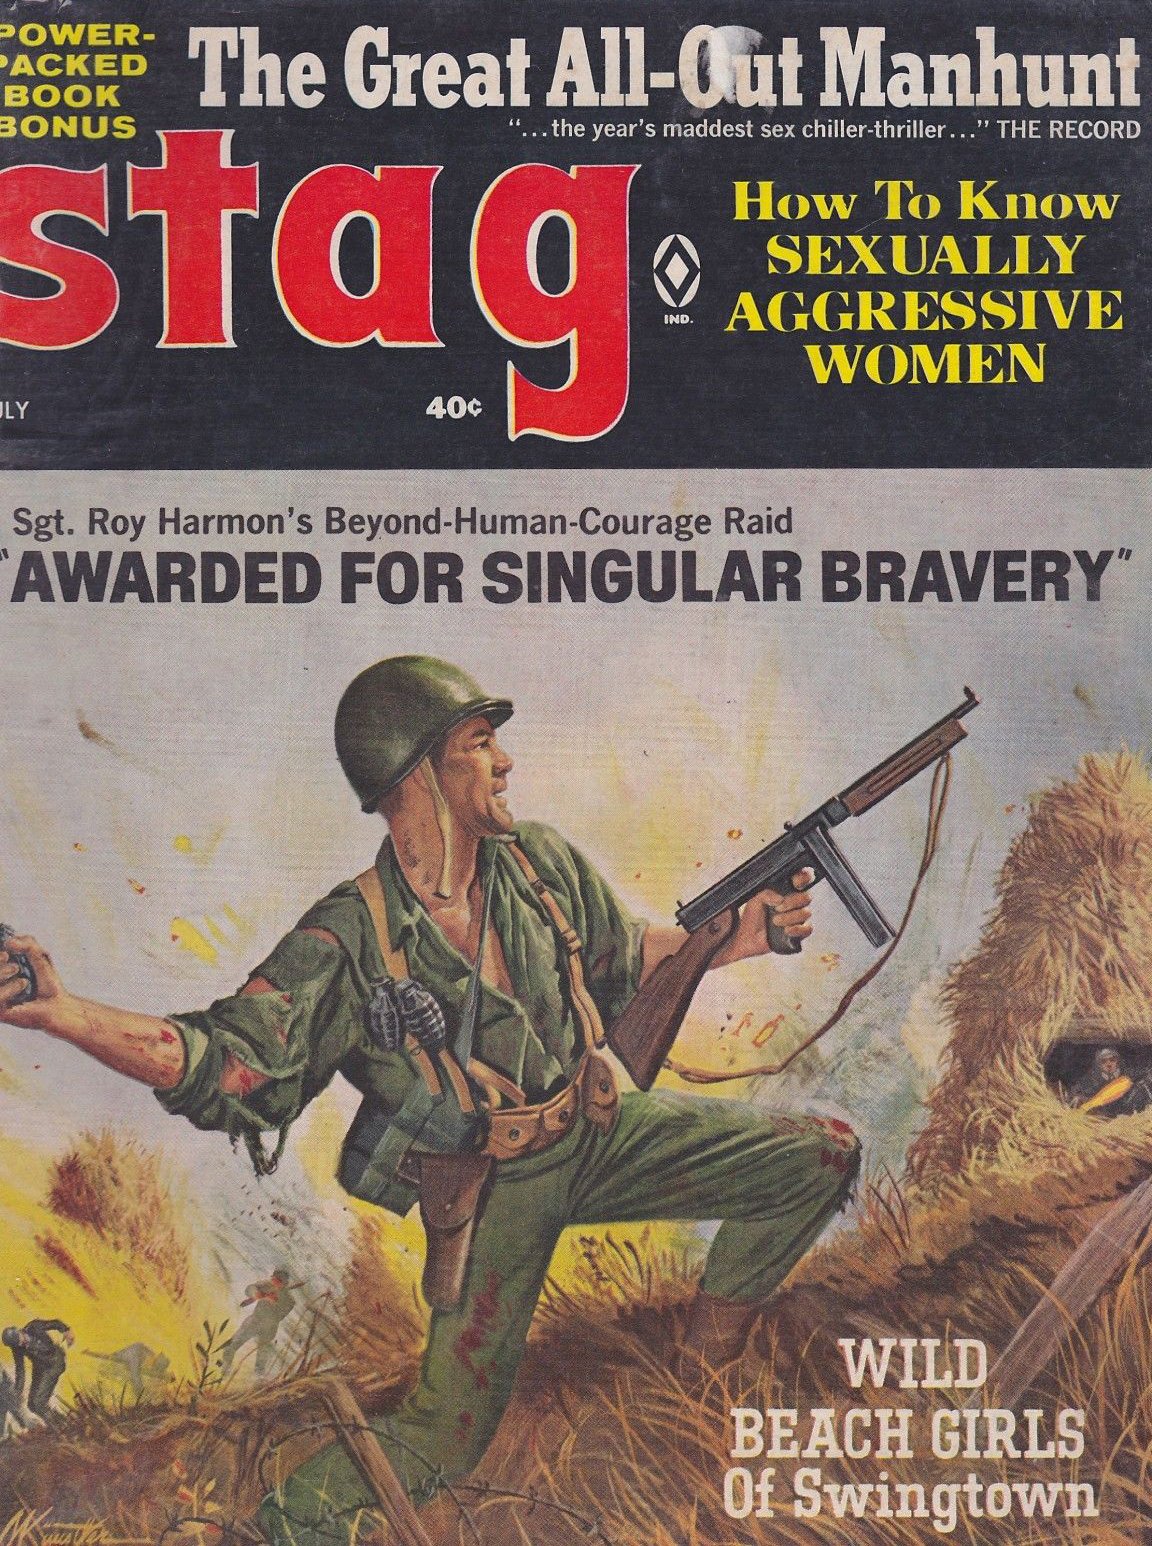 Stag July 1966, Stag July 1966 Magazine for Men Adult Back Issue Published by Leeds Publishing Corp. The Great All - Out Manhunt., The Great All - Out Manhunt